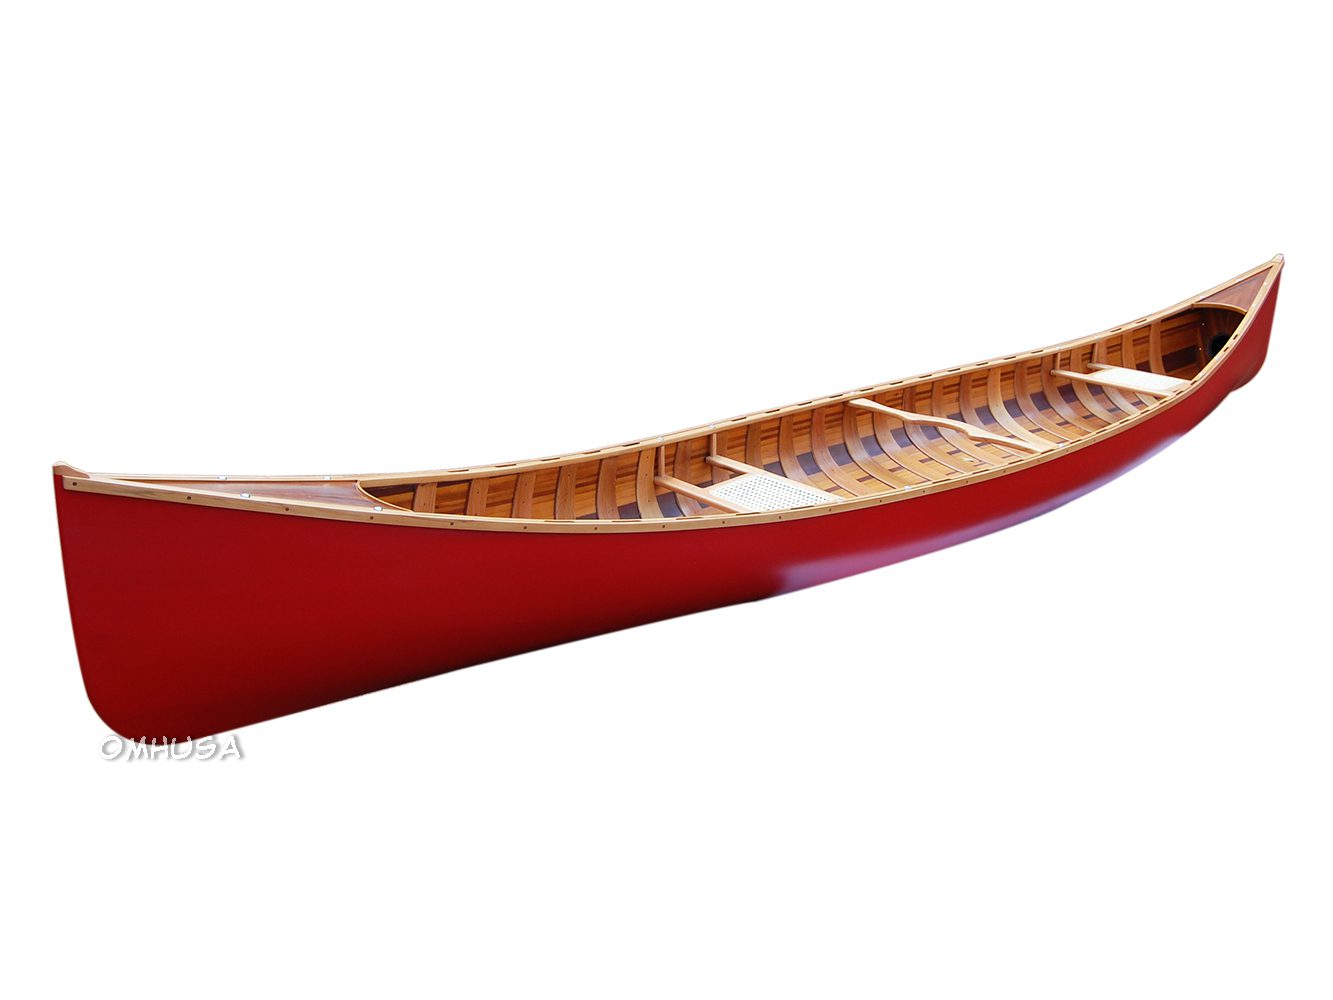 Shop Red Wooden Canoe with Ribs 16 Online - Wooden Boat USA